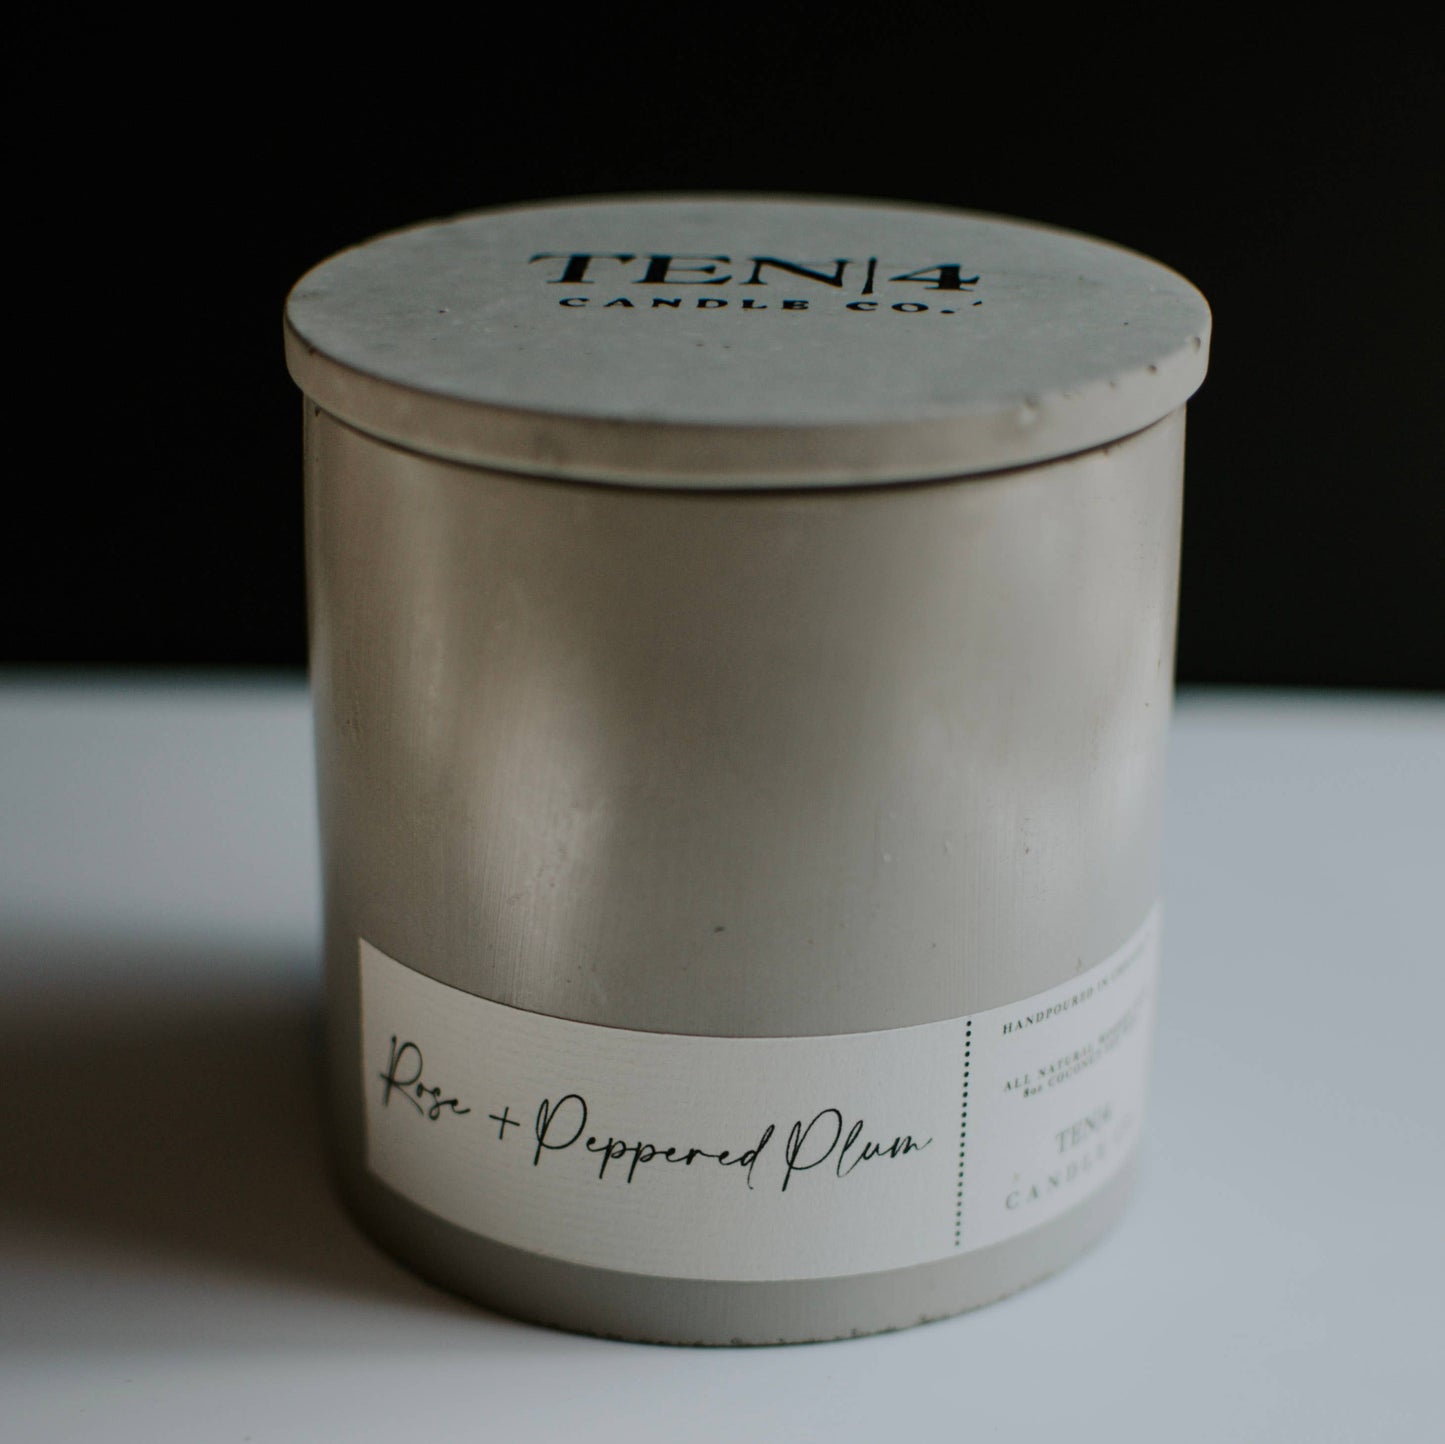 TEN|4 Candle Co. - Rose + Peppered Plum -Floral Scented Concrete Candles